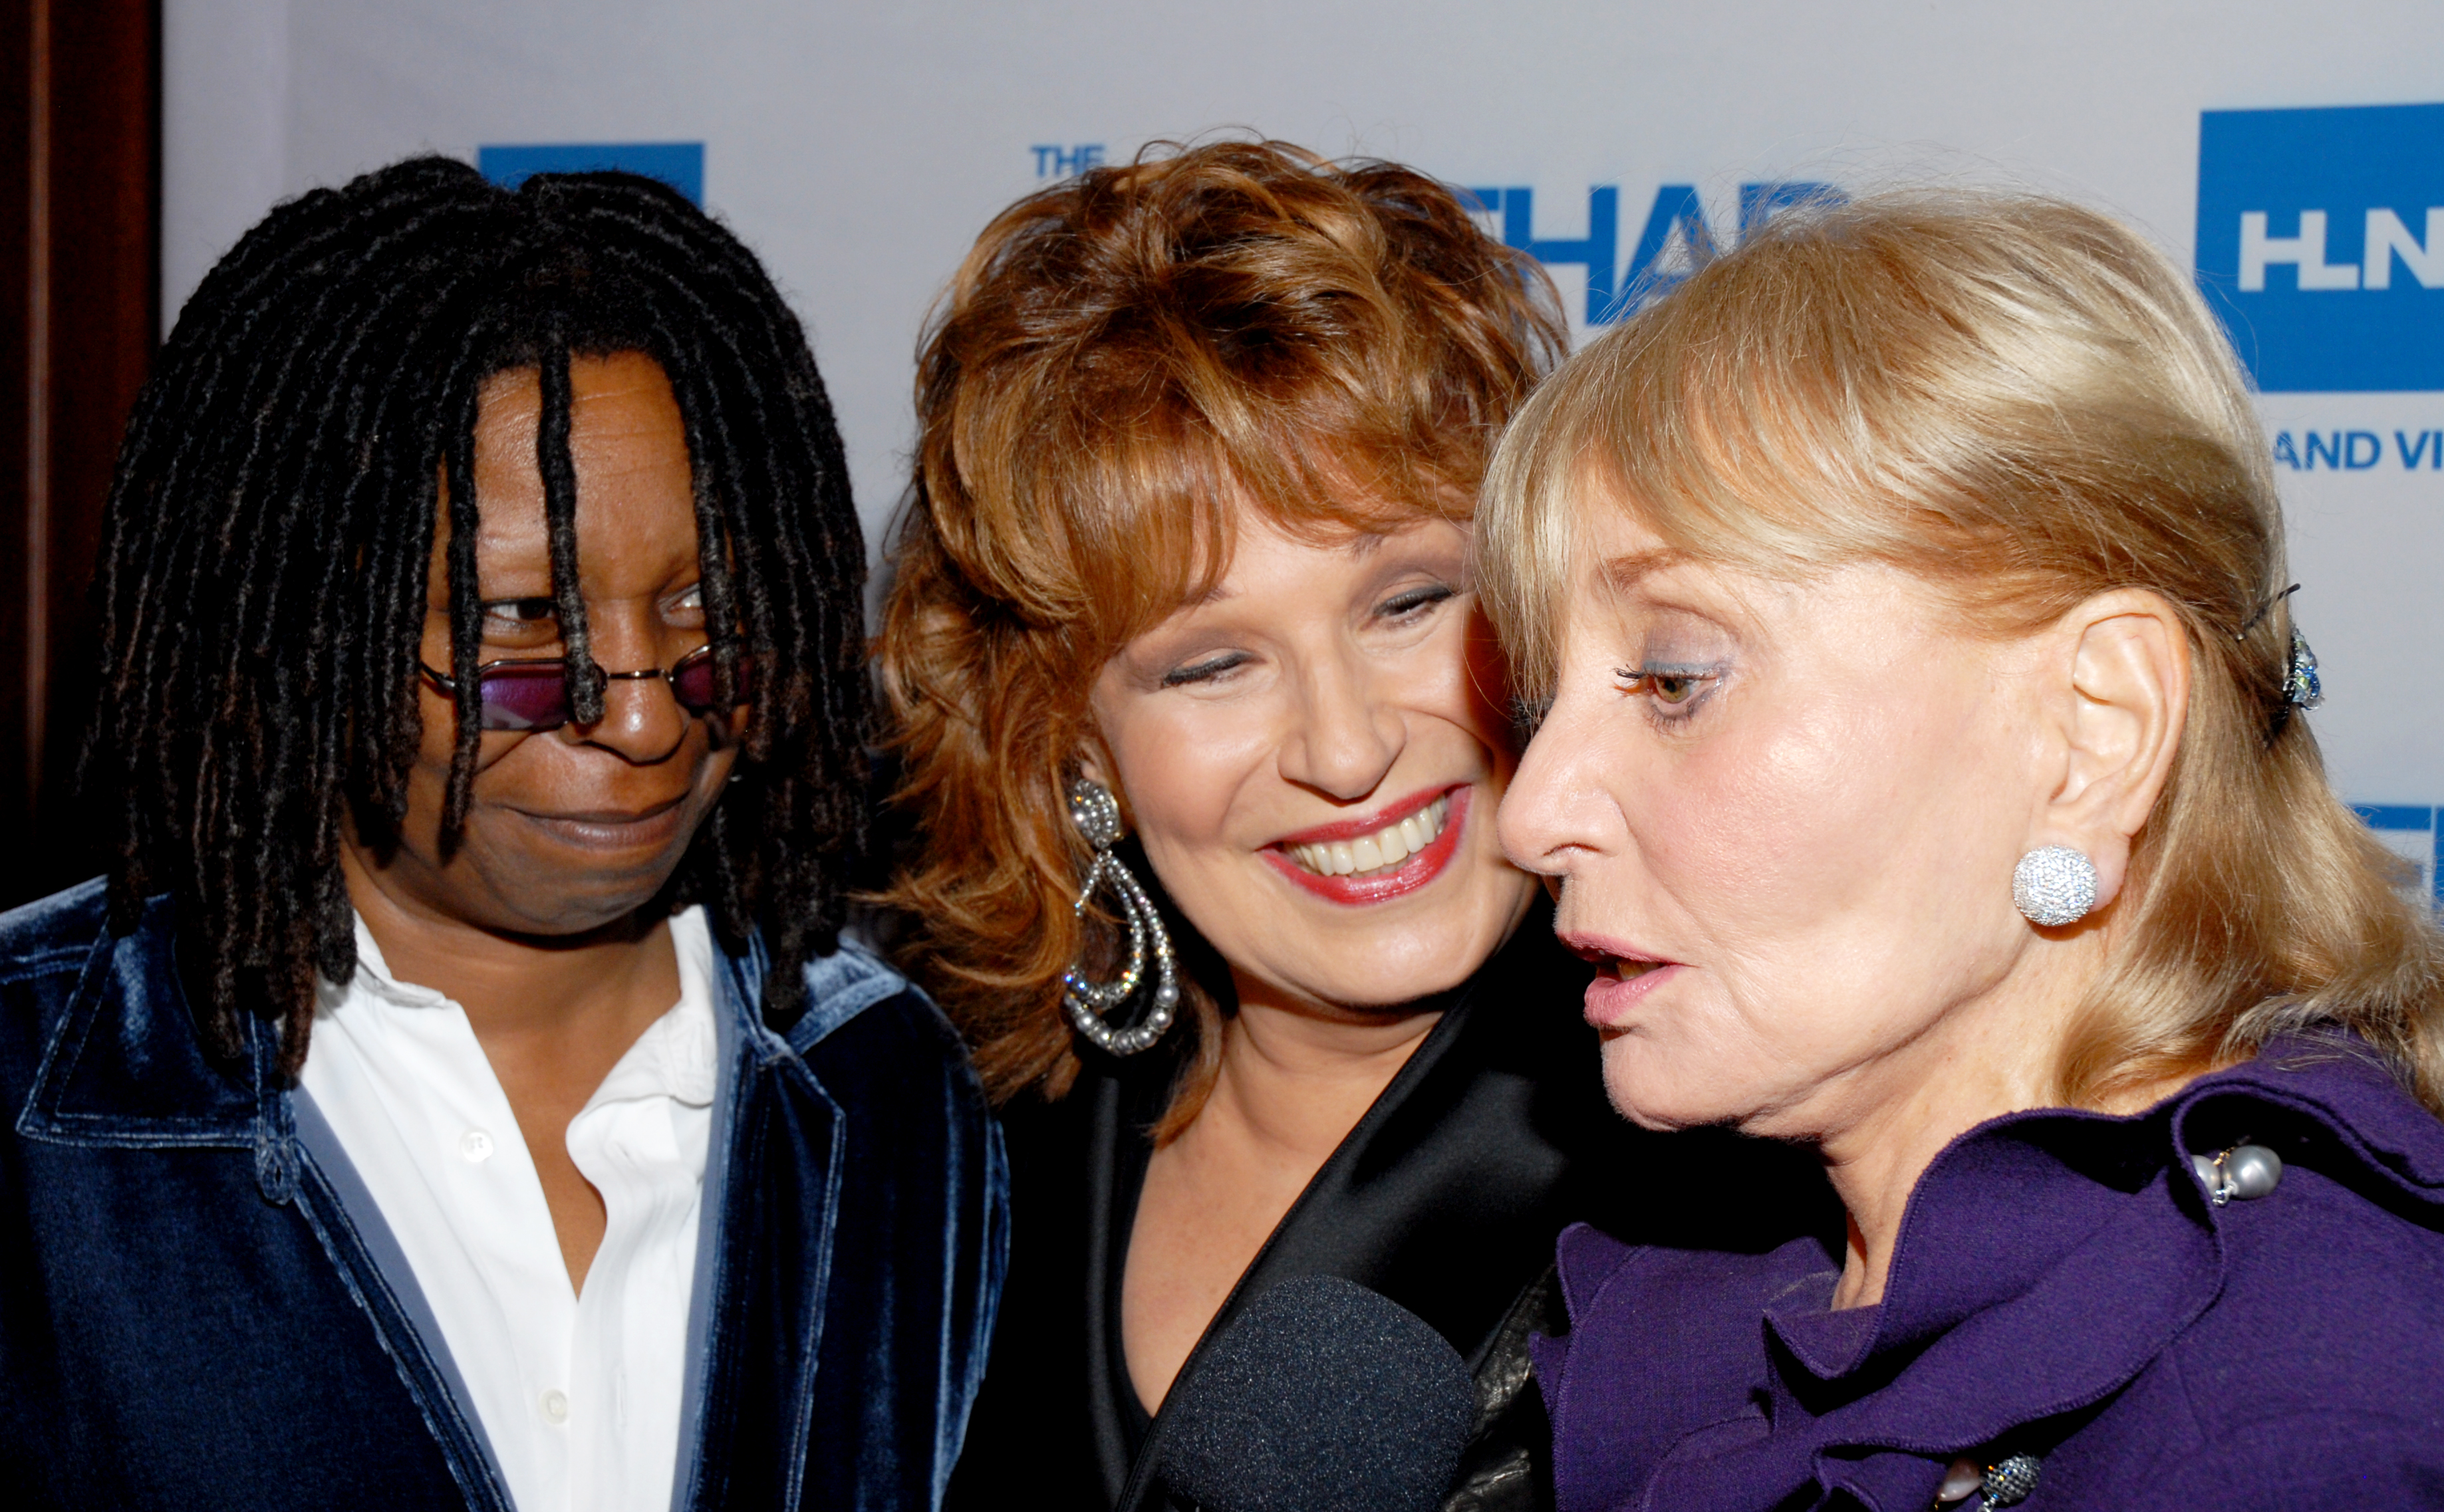 Whoopi Goldberg, Joy Behar and Barbara Walters in New York in 2009 | Source: Getty Images